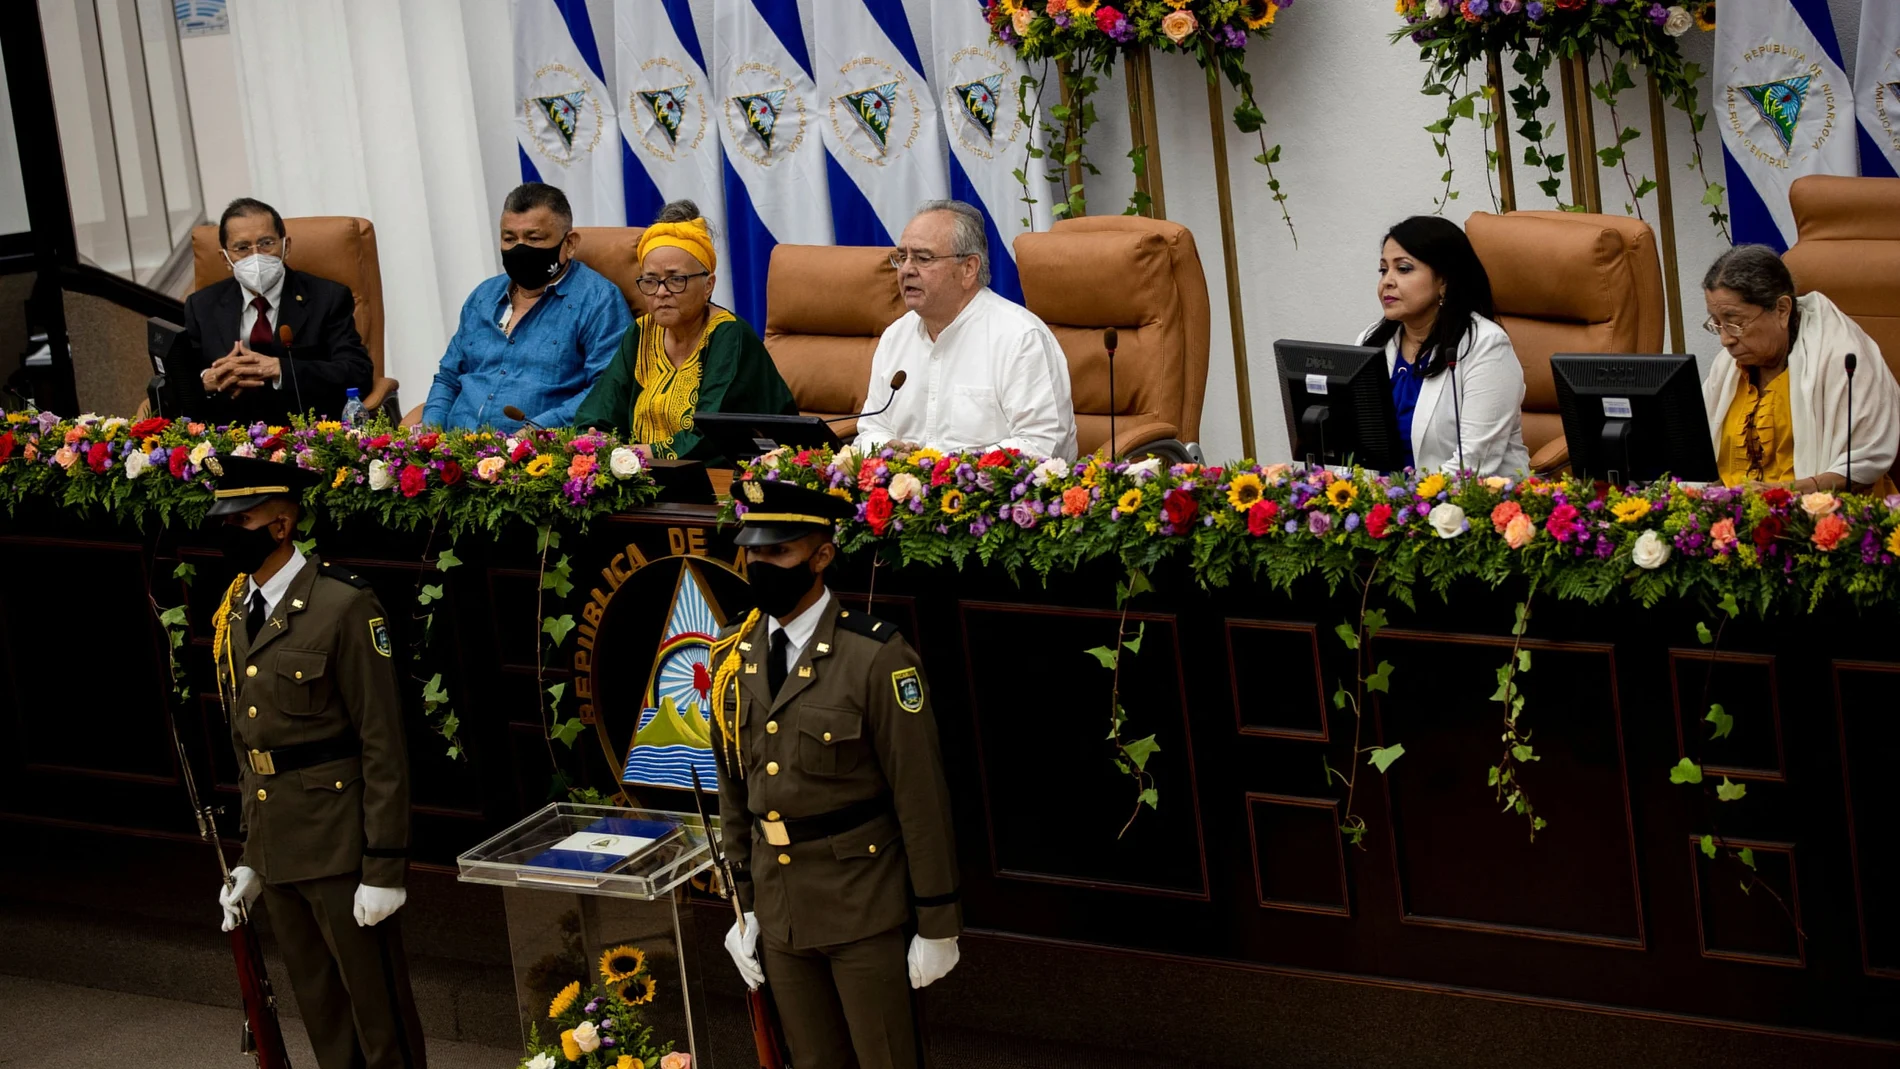 Deputies of new parliament, participate in the inaugural ceremony of the National Assembly, ahead of Nicaragua President Daniel Ortega's swearing-in ceremony after being re-elected for a fourth consecutive term, at the National Assambly building in Managua, Nicaragua January 9, 2022. REUTERS/Stringer NO RESALES. NO ARCHIVES